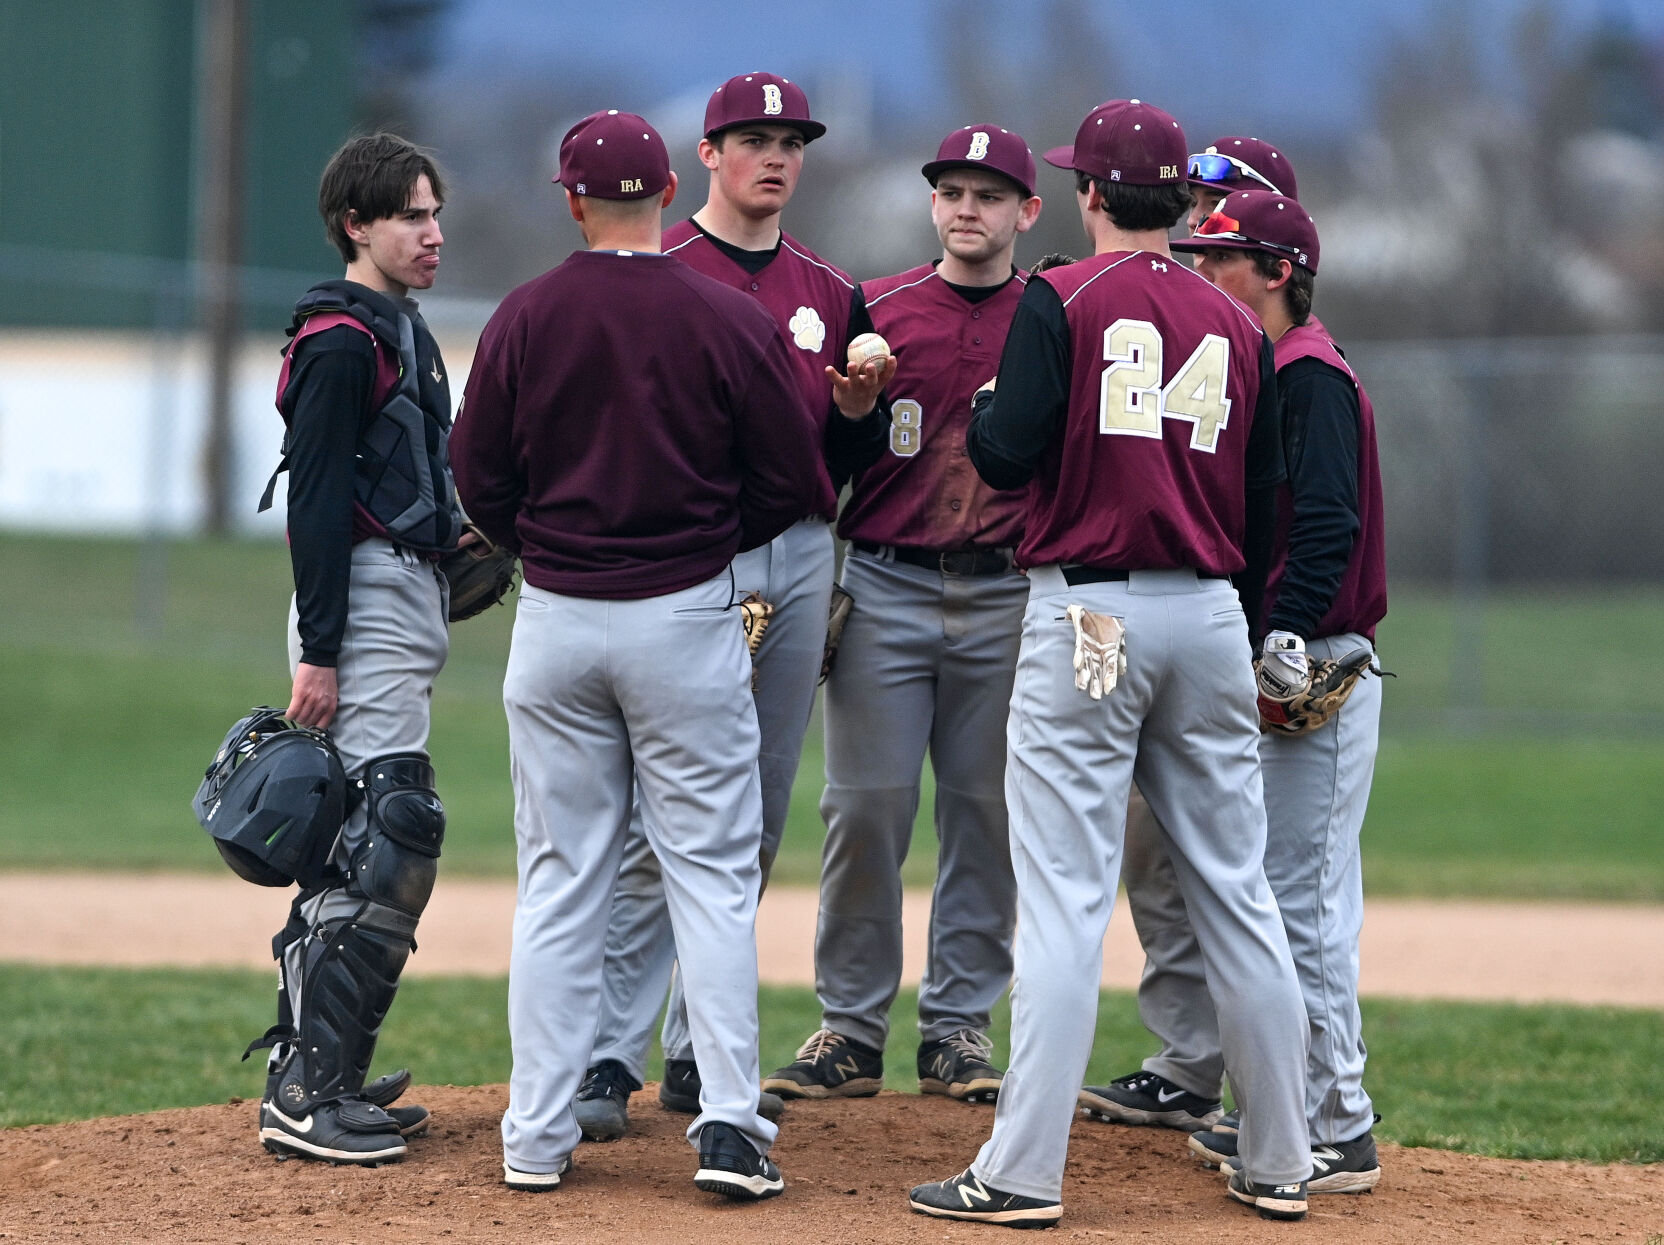 Big Spring Bulldogs Dominate Boiling Springs in Mercy-Rule Win: Josh Hockensmith’s Crucial Play Ignites Victory